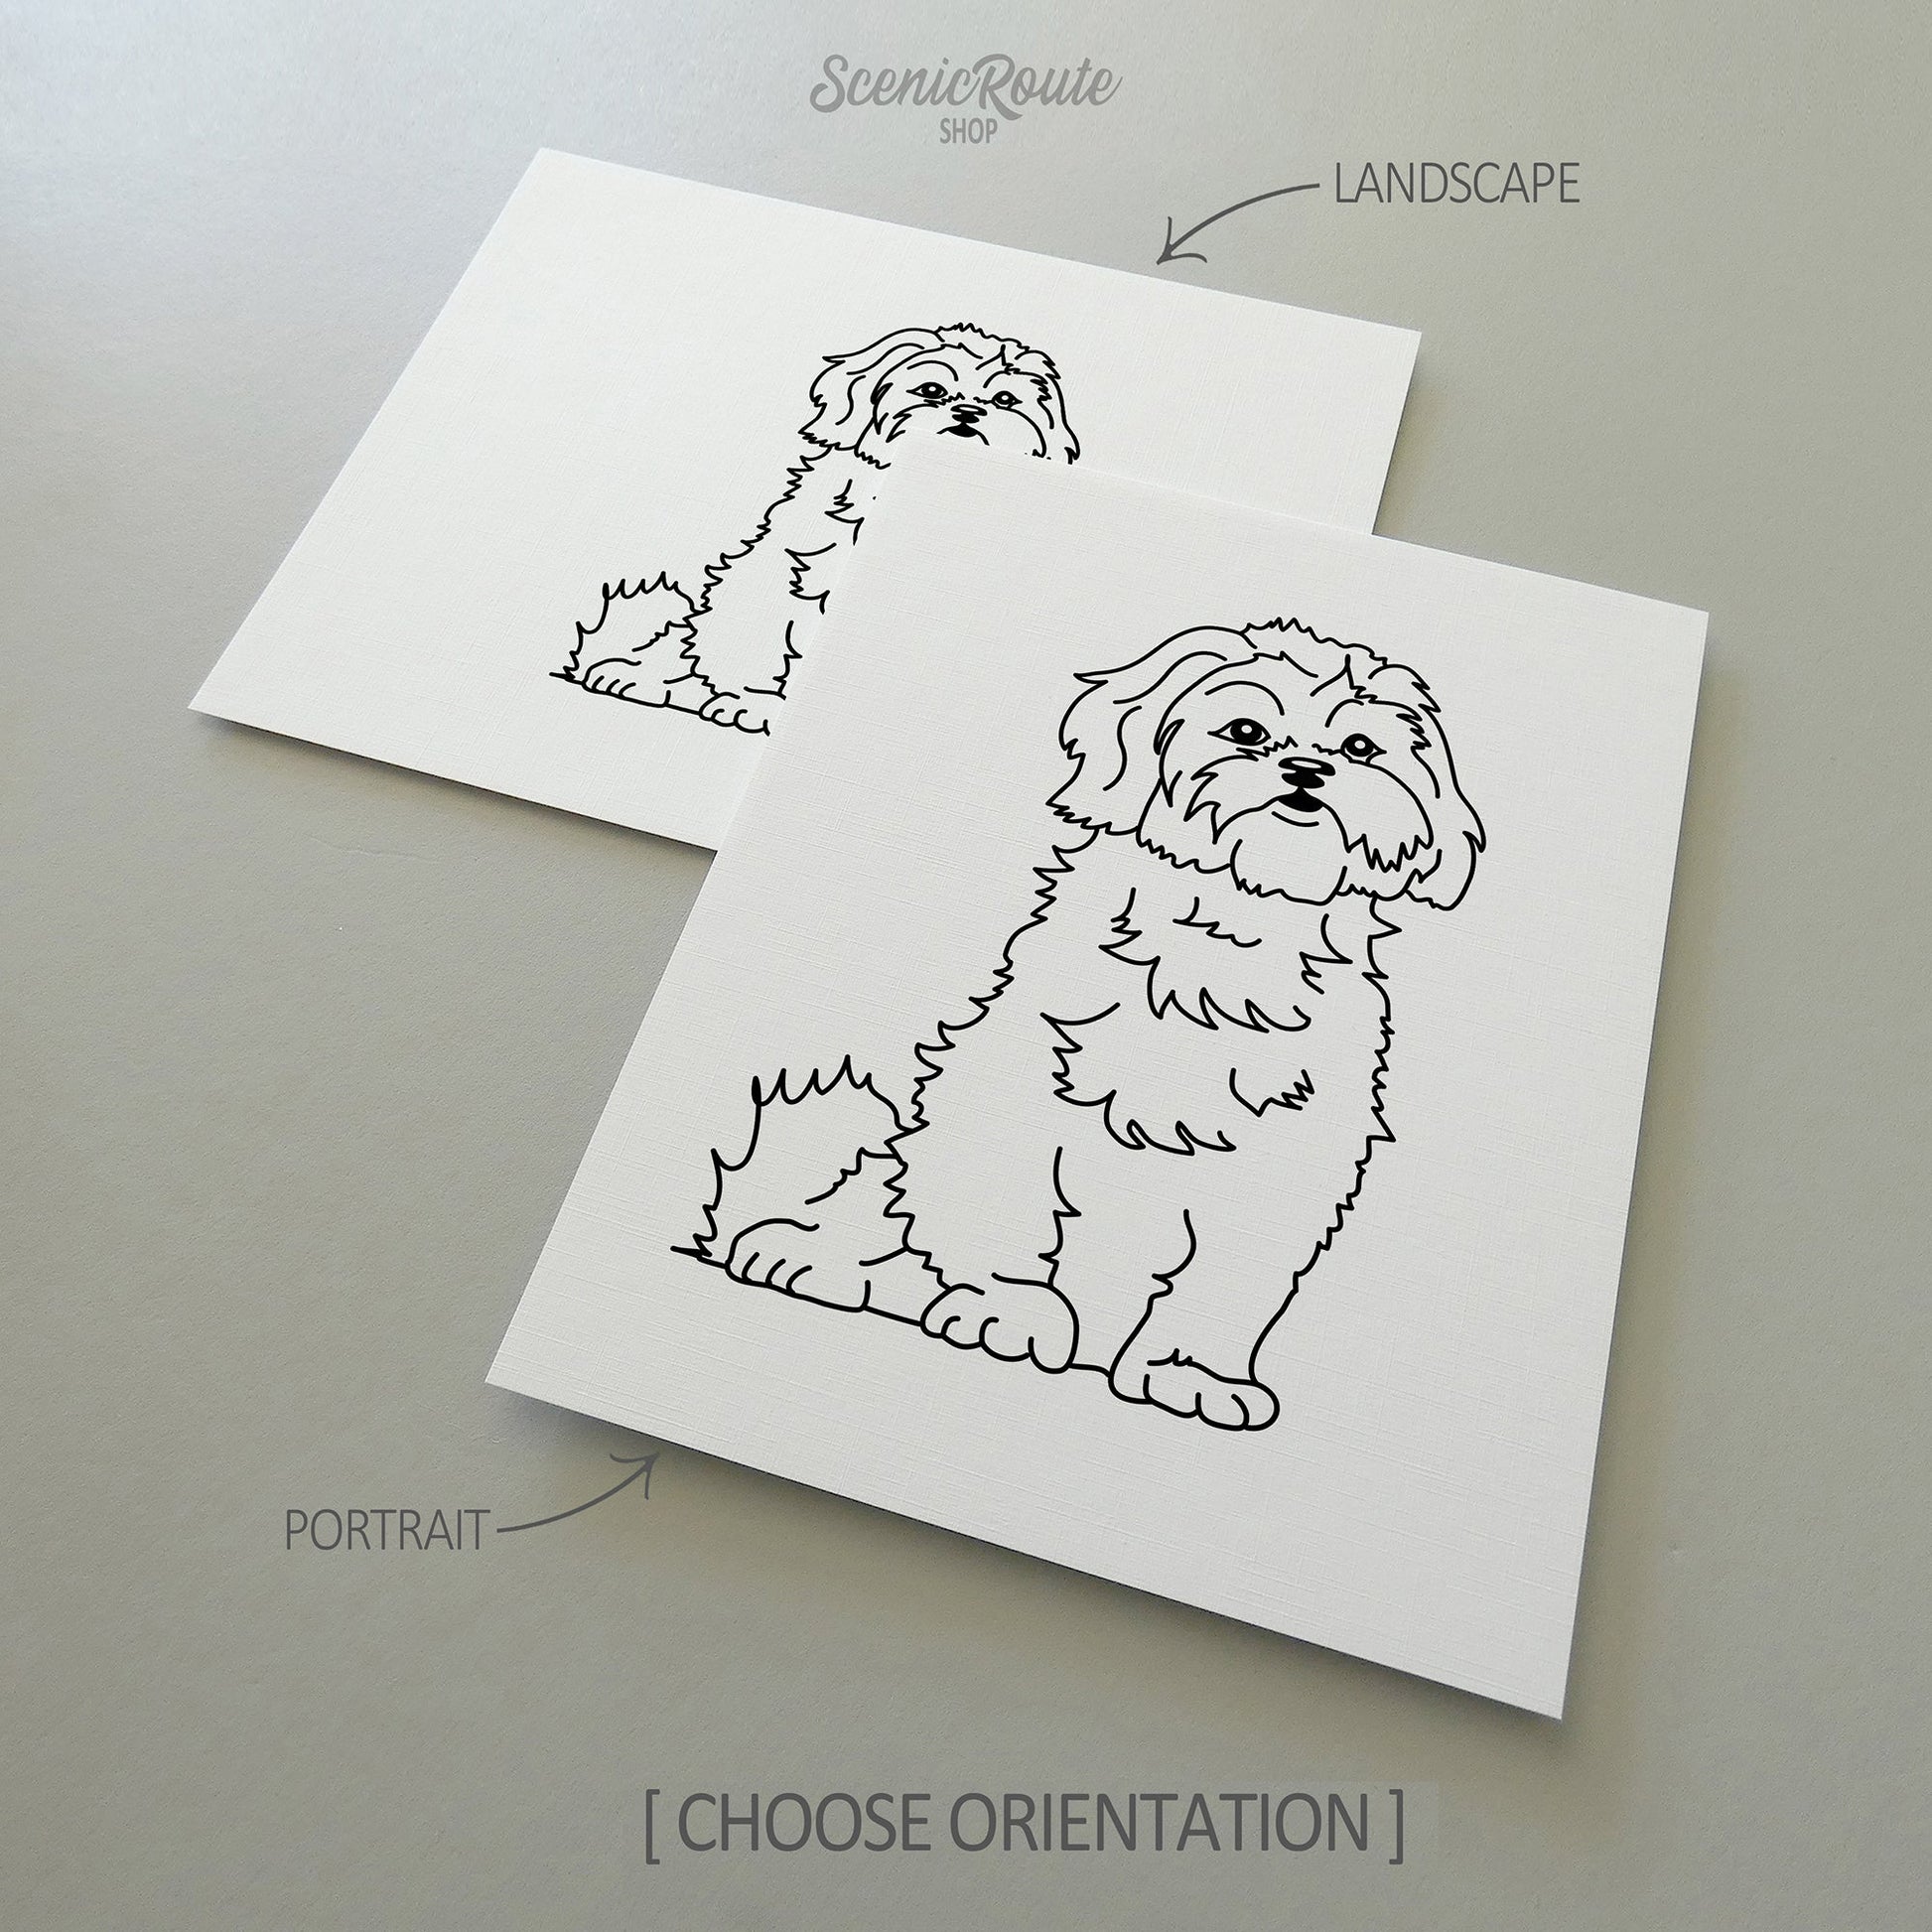 Two line art drawings of a Shih Tzu dog on white linen paper with a gray background.  The pieces are shown in portrait and landscape orientation for the available art print options.